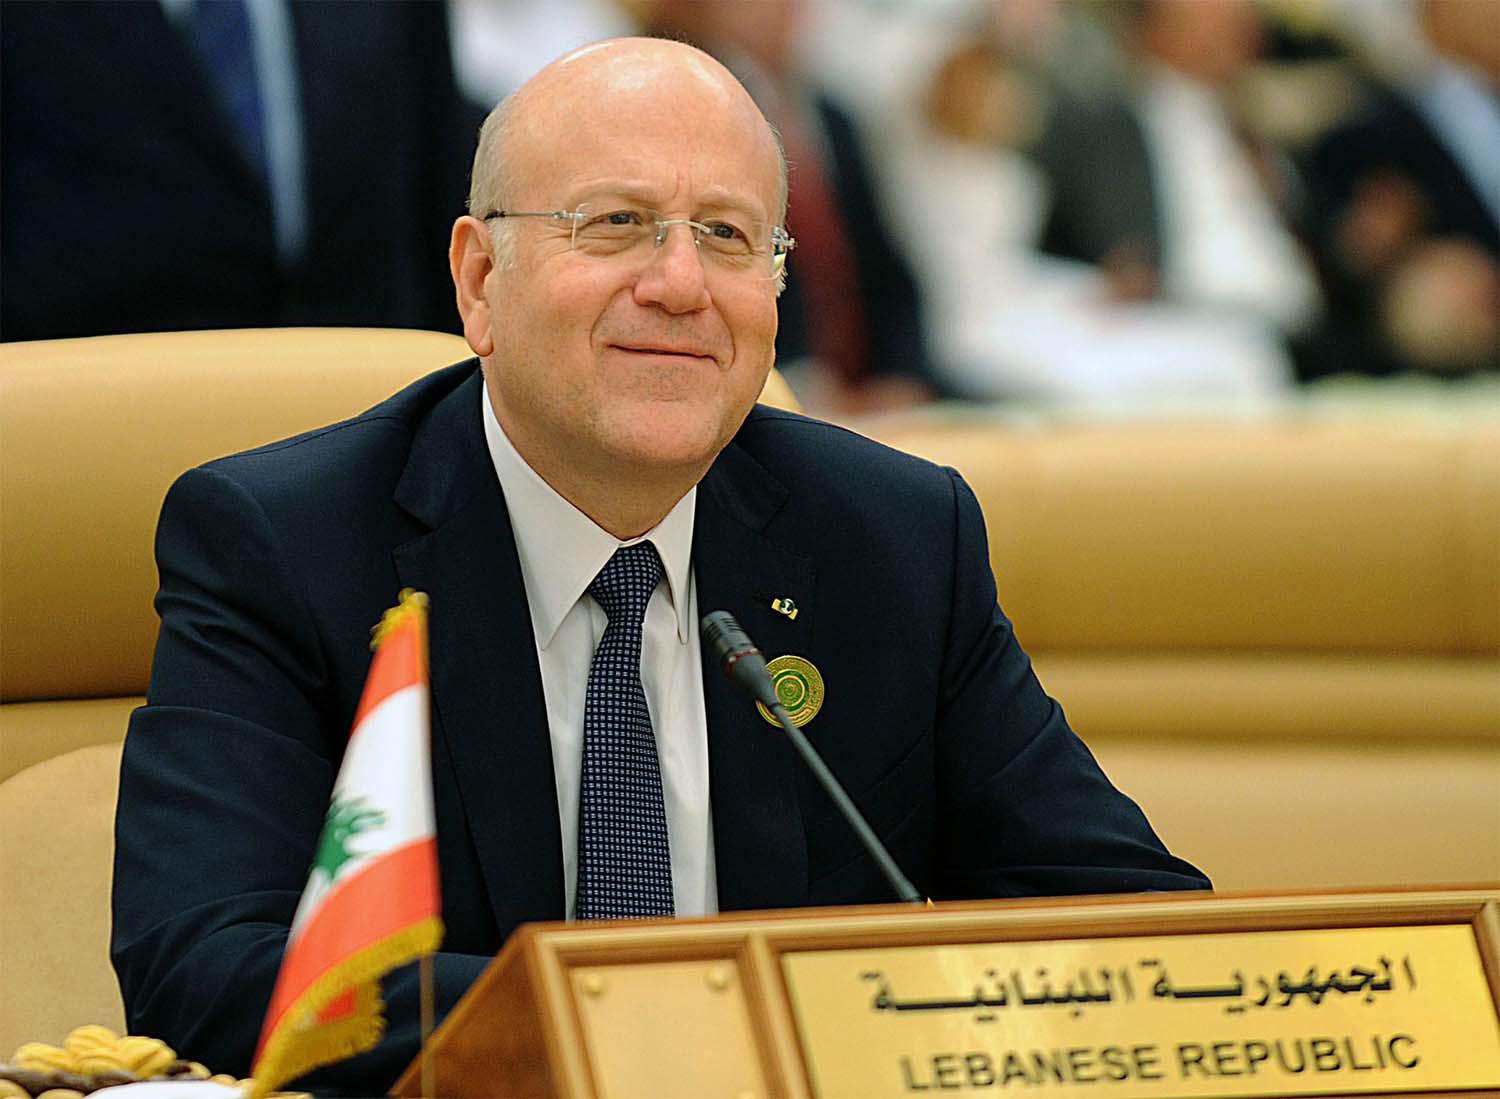 Mikati served as prime minister in 2005 and from 2011 to 2013